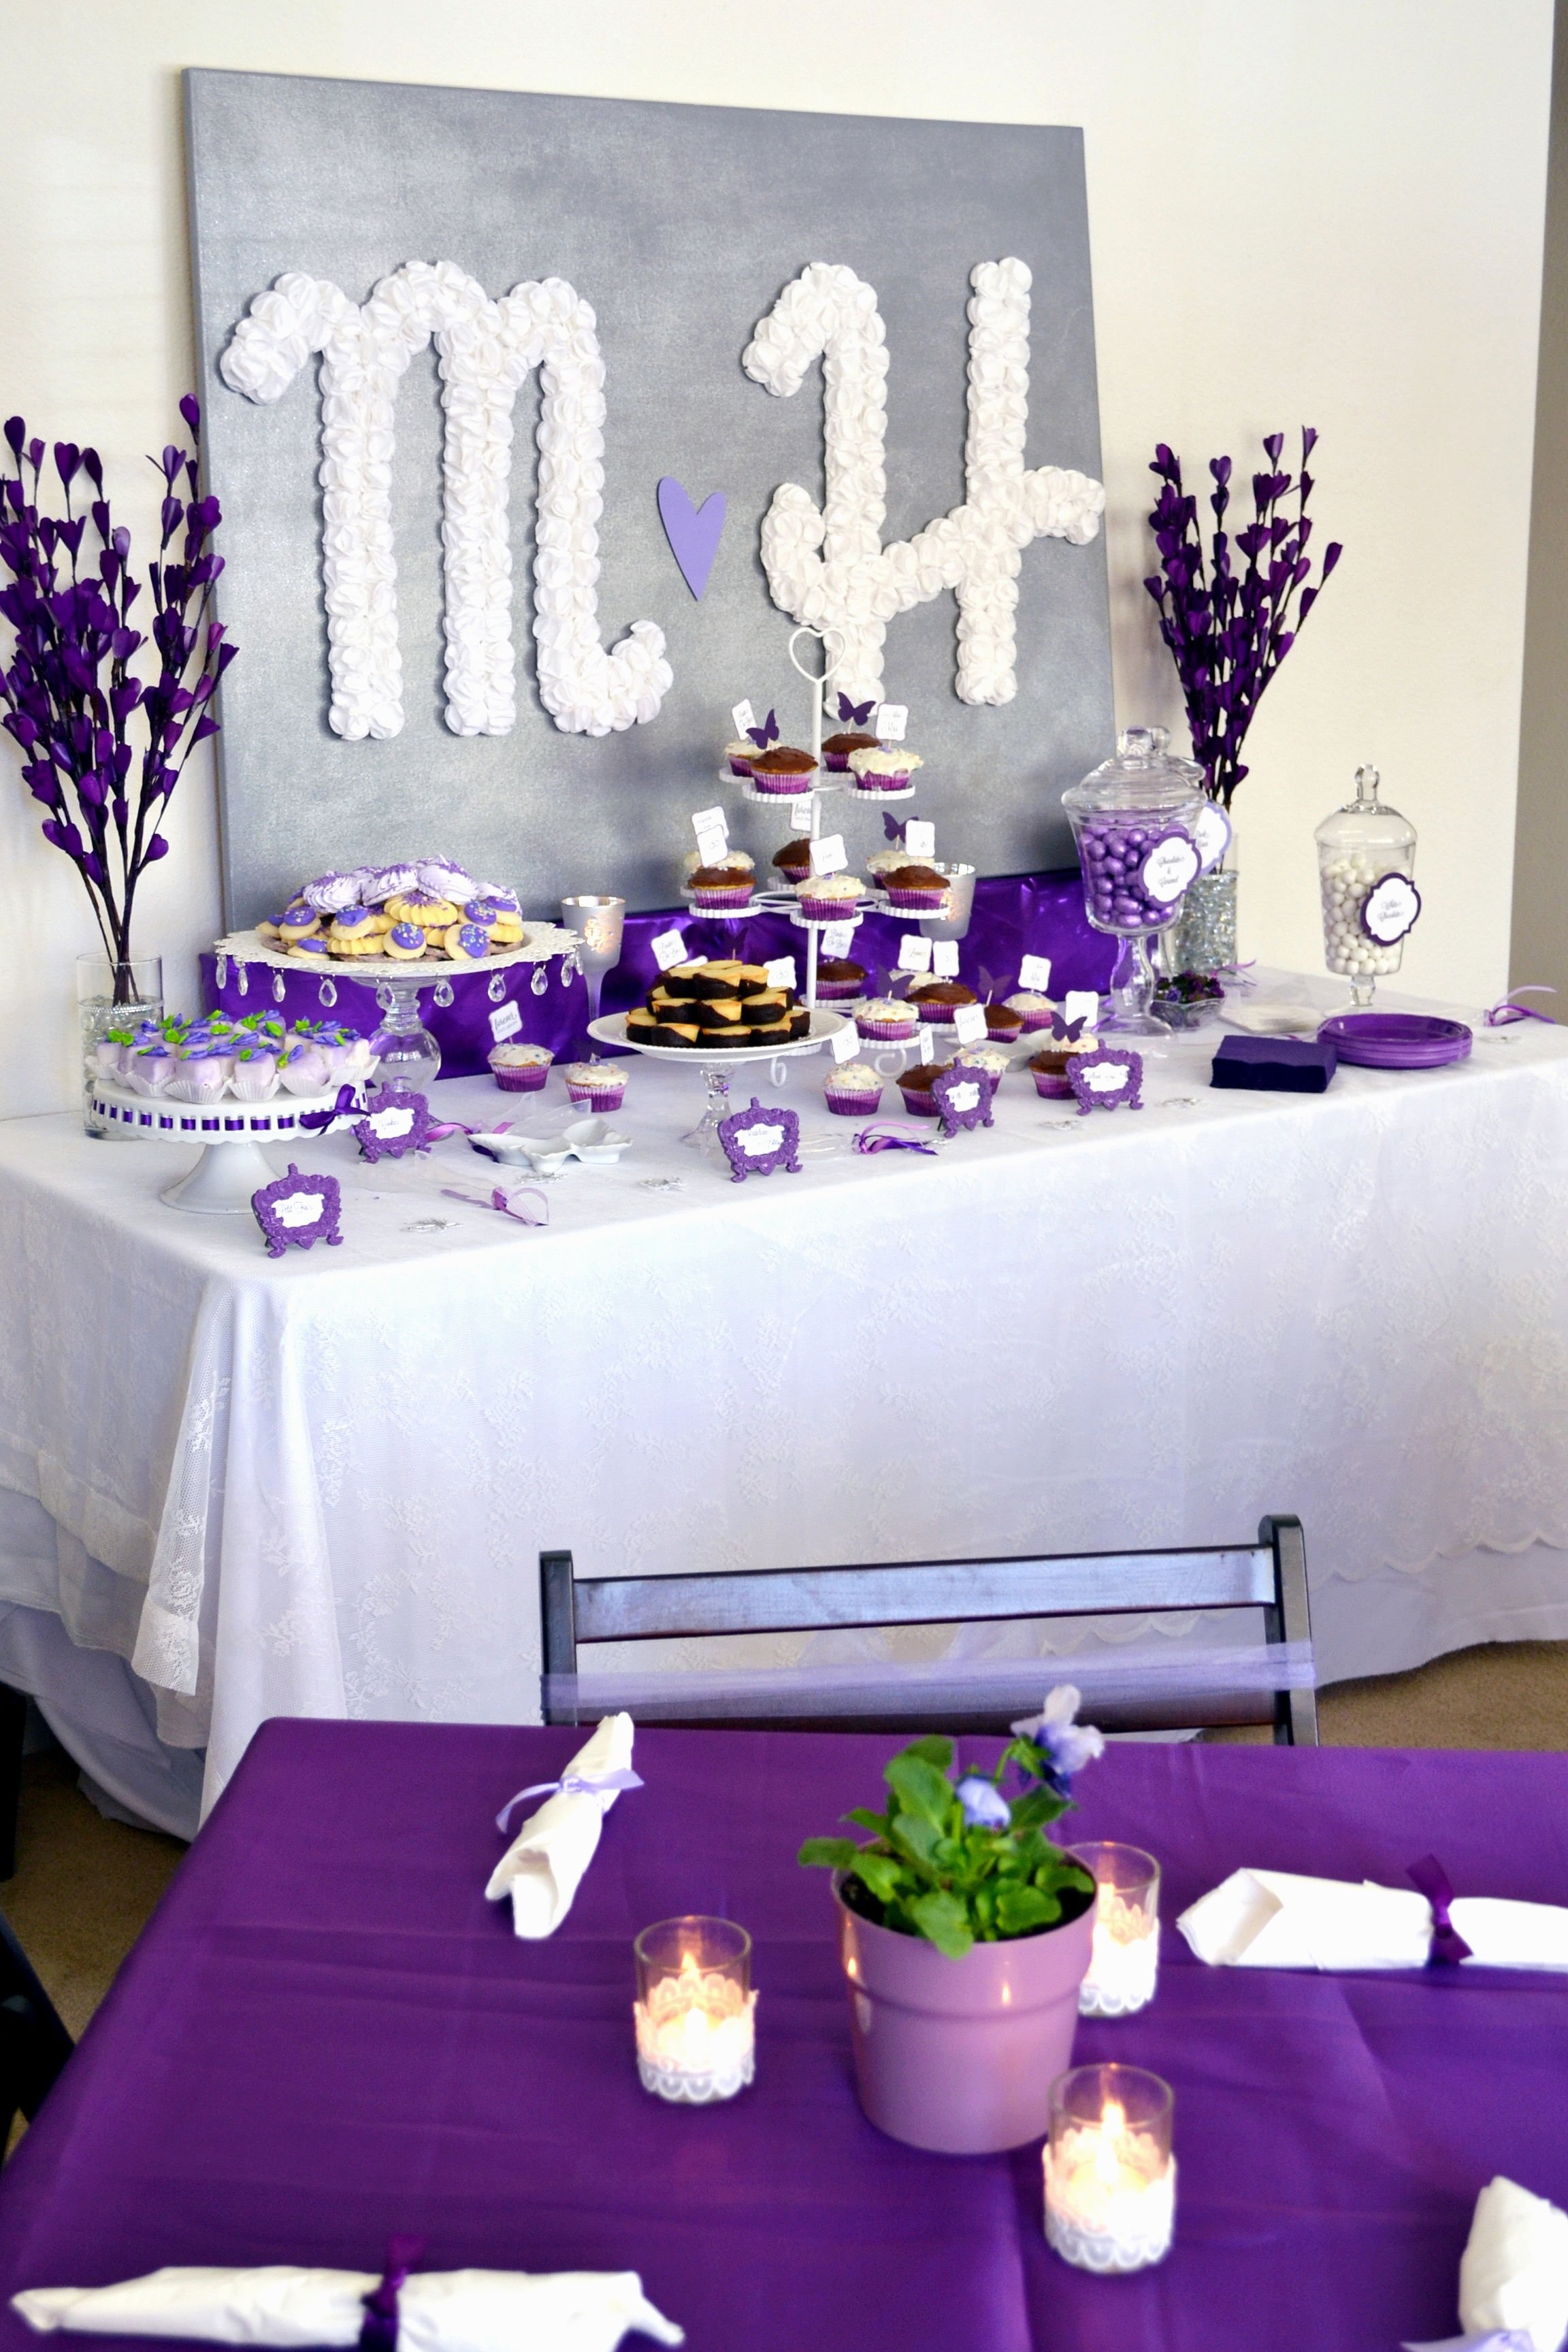 10 Attractive Bridal Shower Ideas On A Budget bridal shower centerpiece ideas purple decorating of party 2022